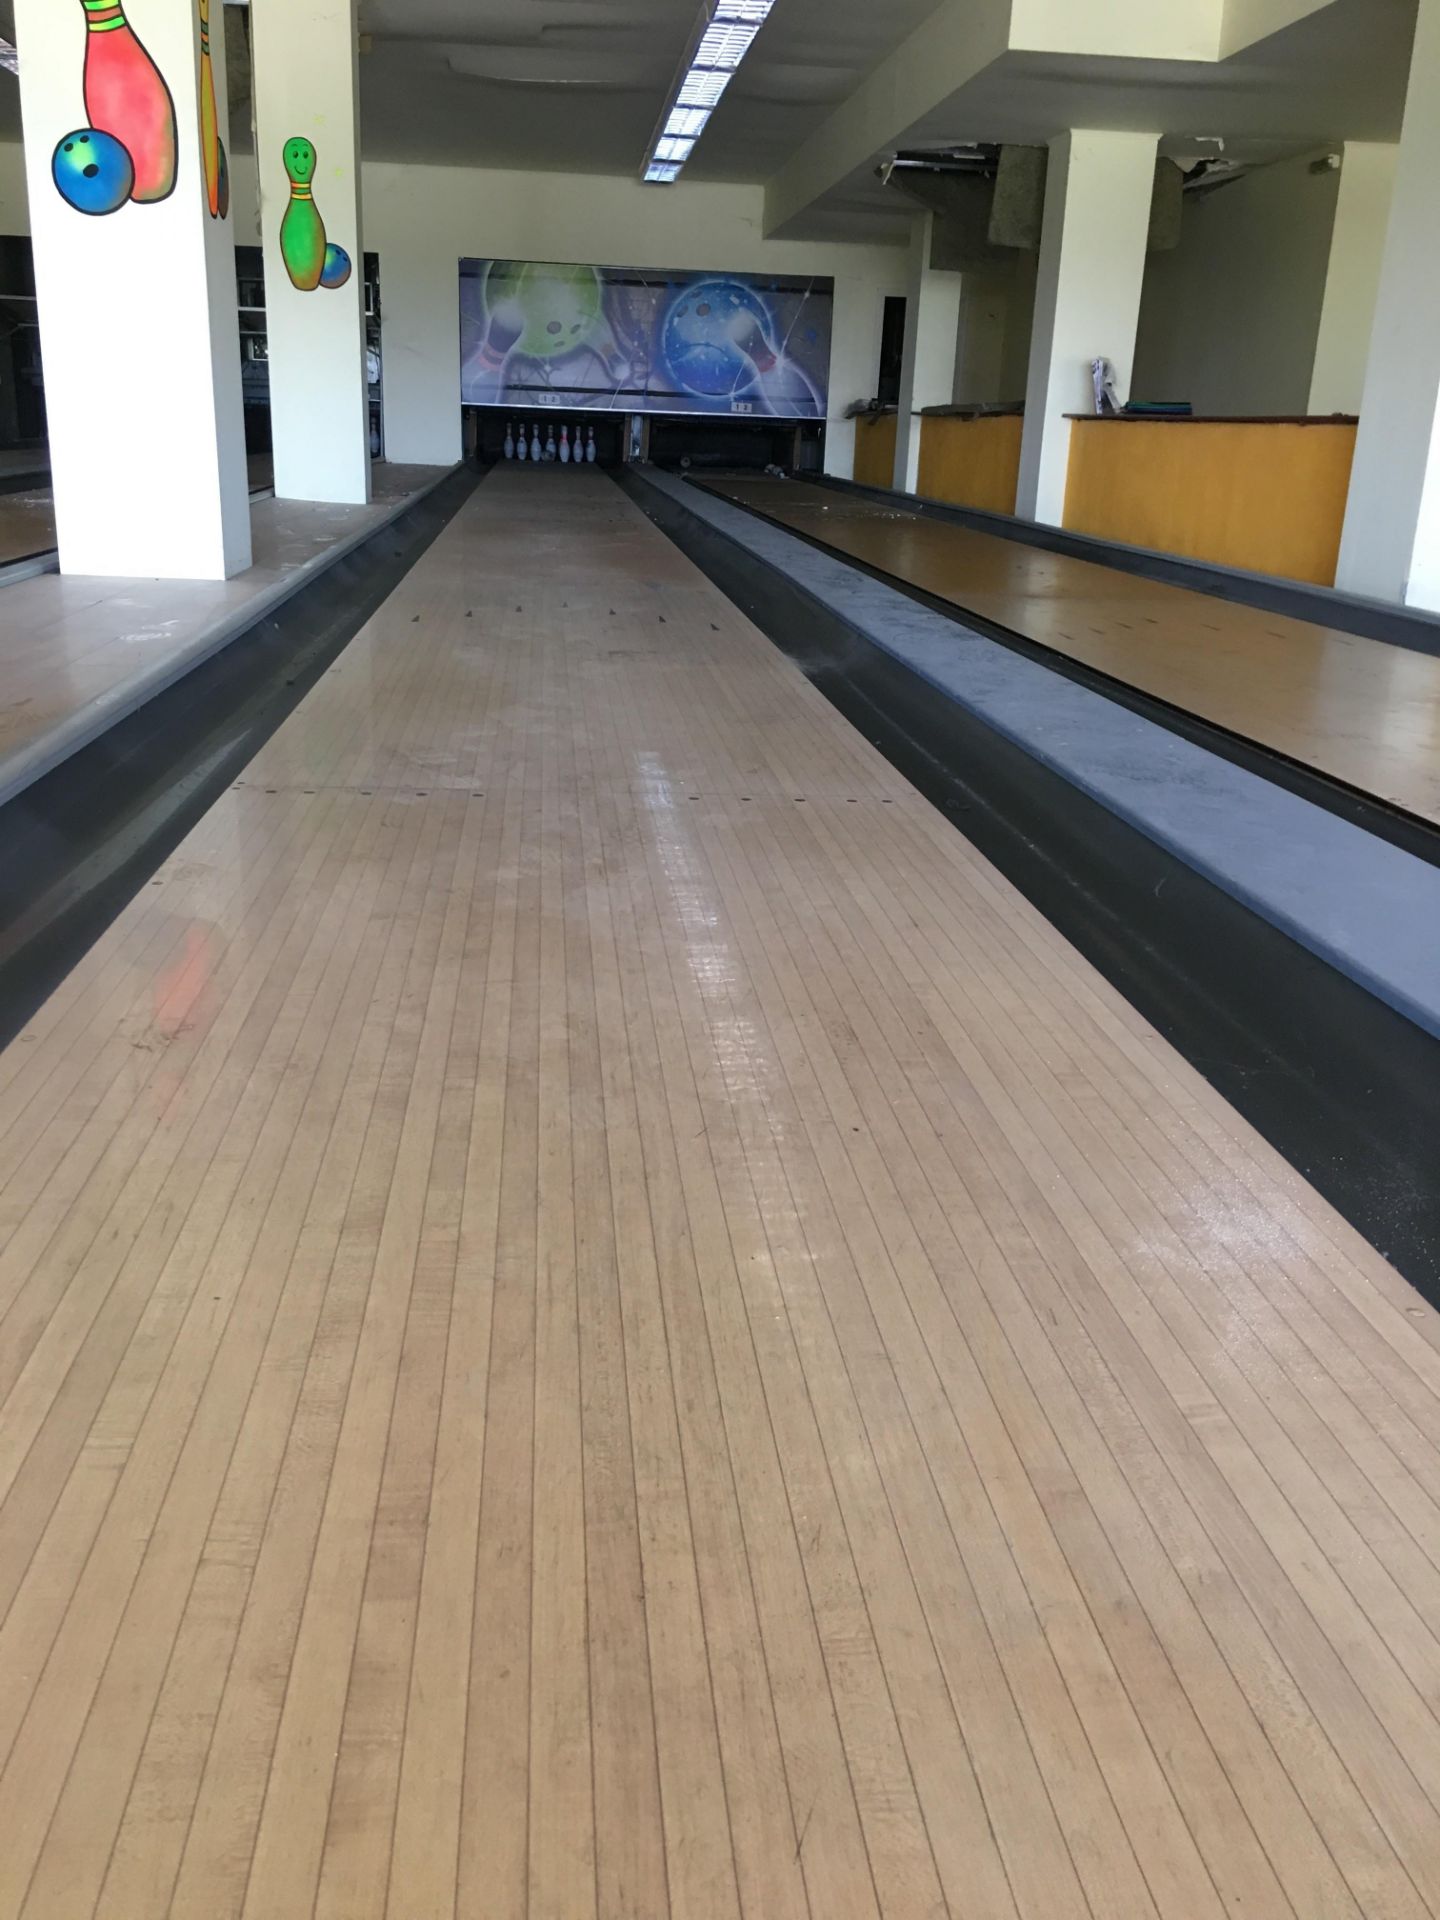 Complete Bowling Facility 4 Lanes Brunswick ( Building Not for Sale) - Image 21 of 86